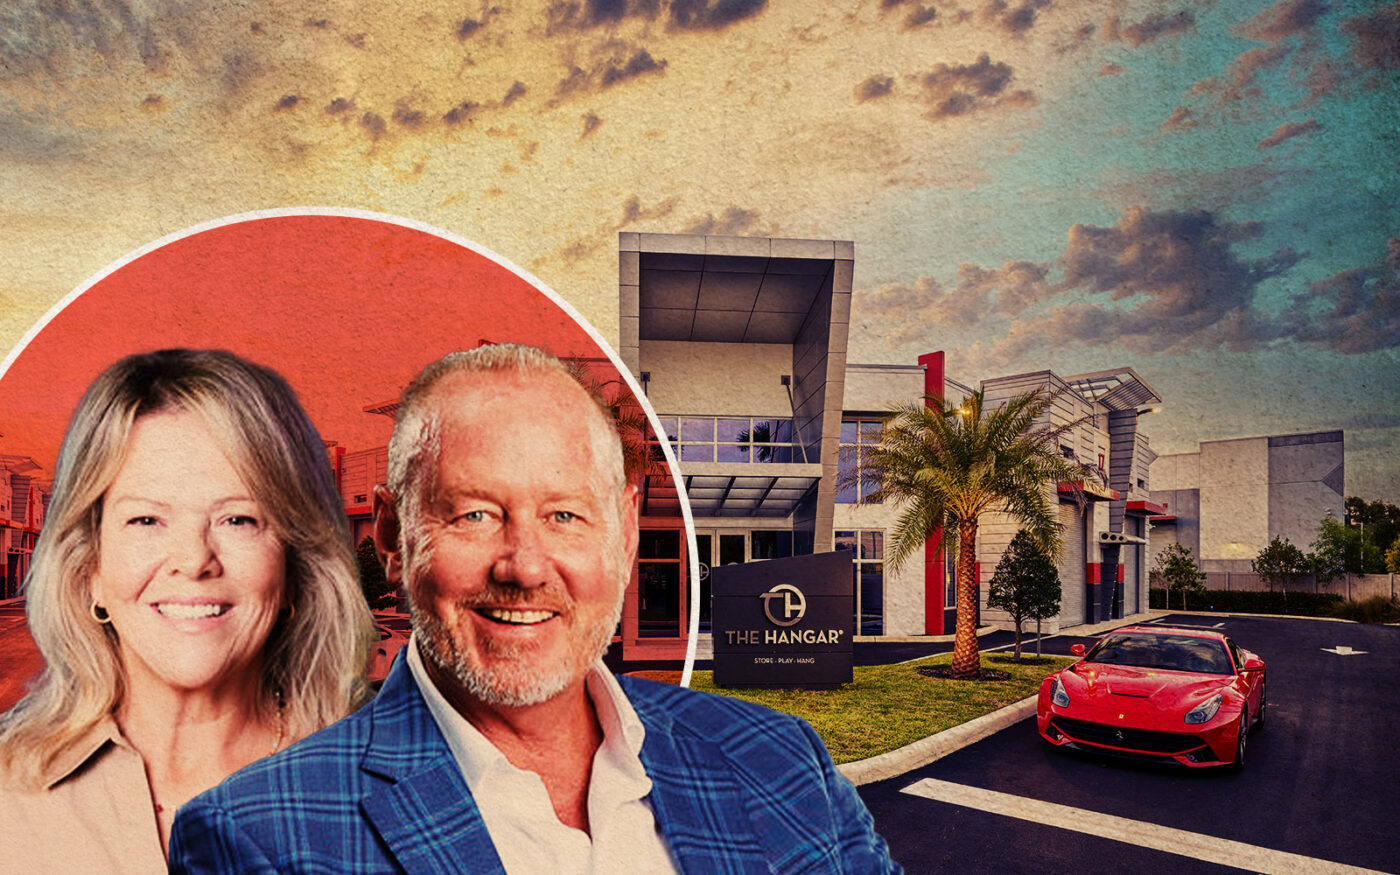 The Hangar Group's Christy Cunningham and Scott Cunningham; exterior of first car condo project in Riviera Beach (The Hangar Group, Getty)